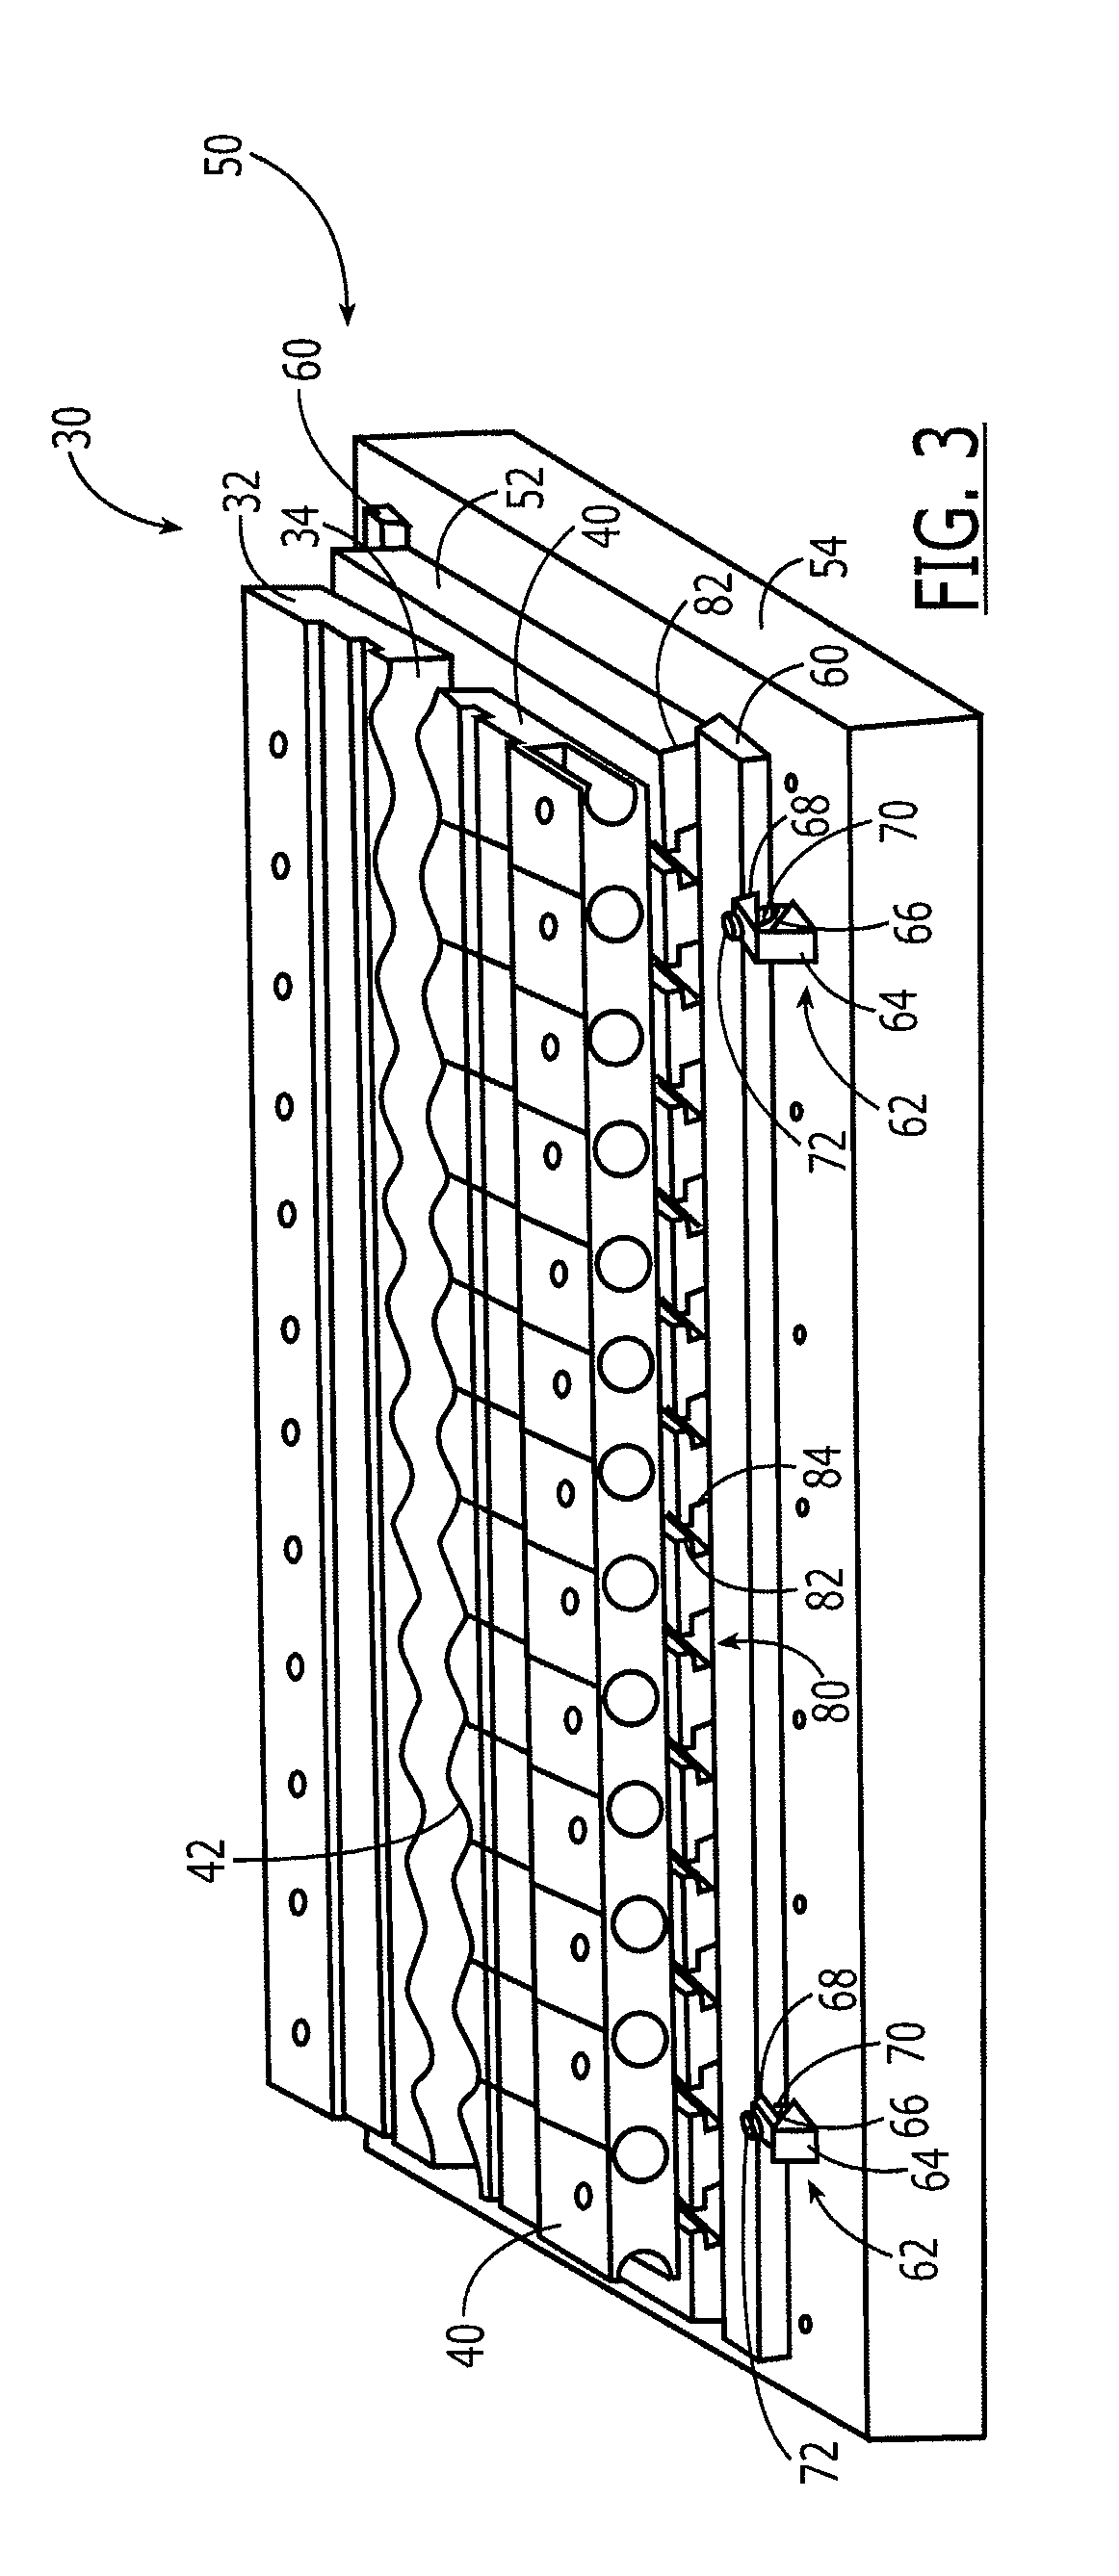 Apparatus and method for forming corrugated members